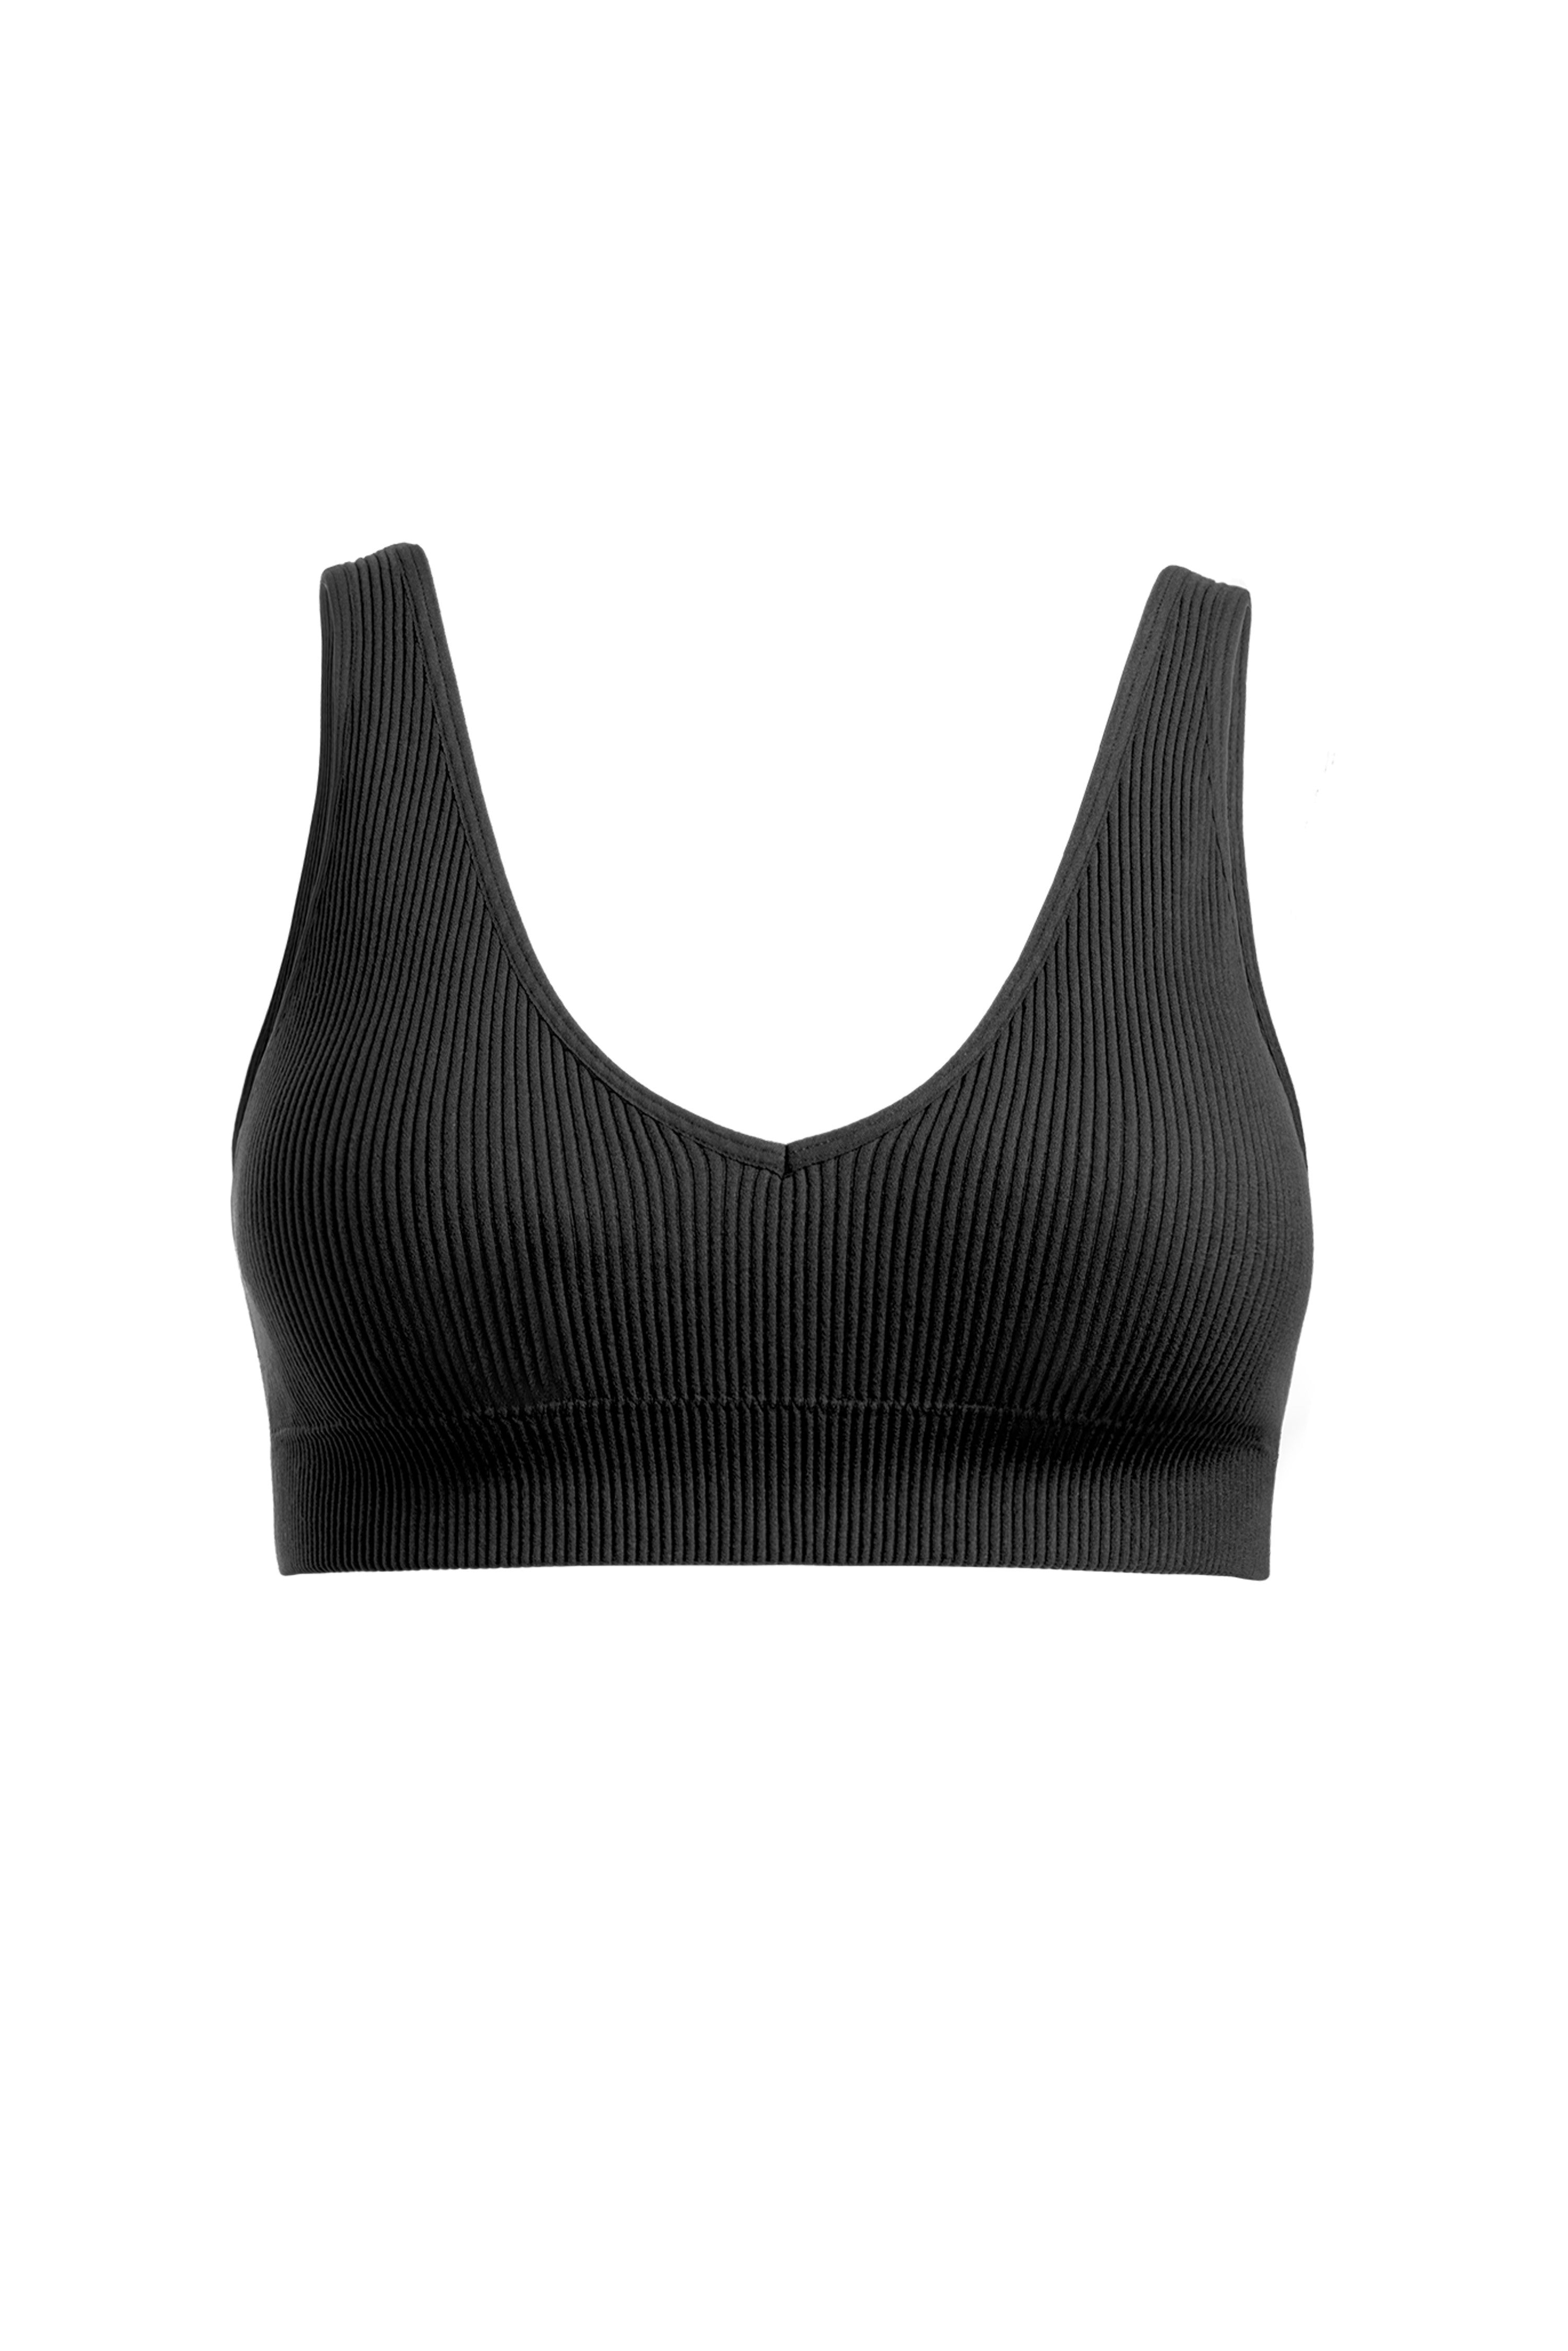 Black Padded Rib Bralette | Collective Request 